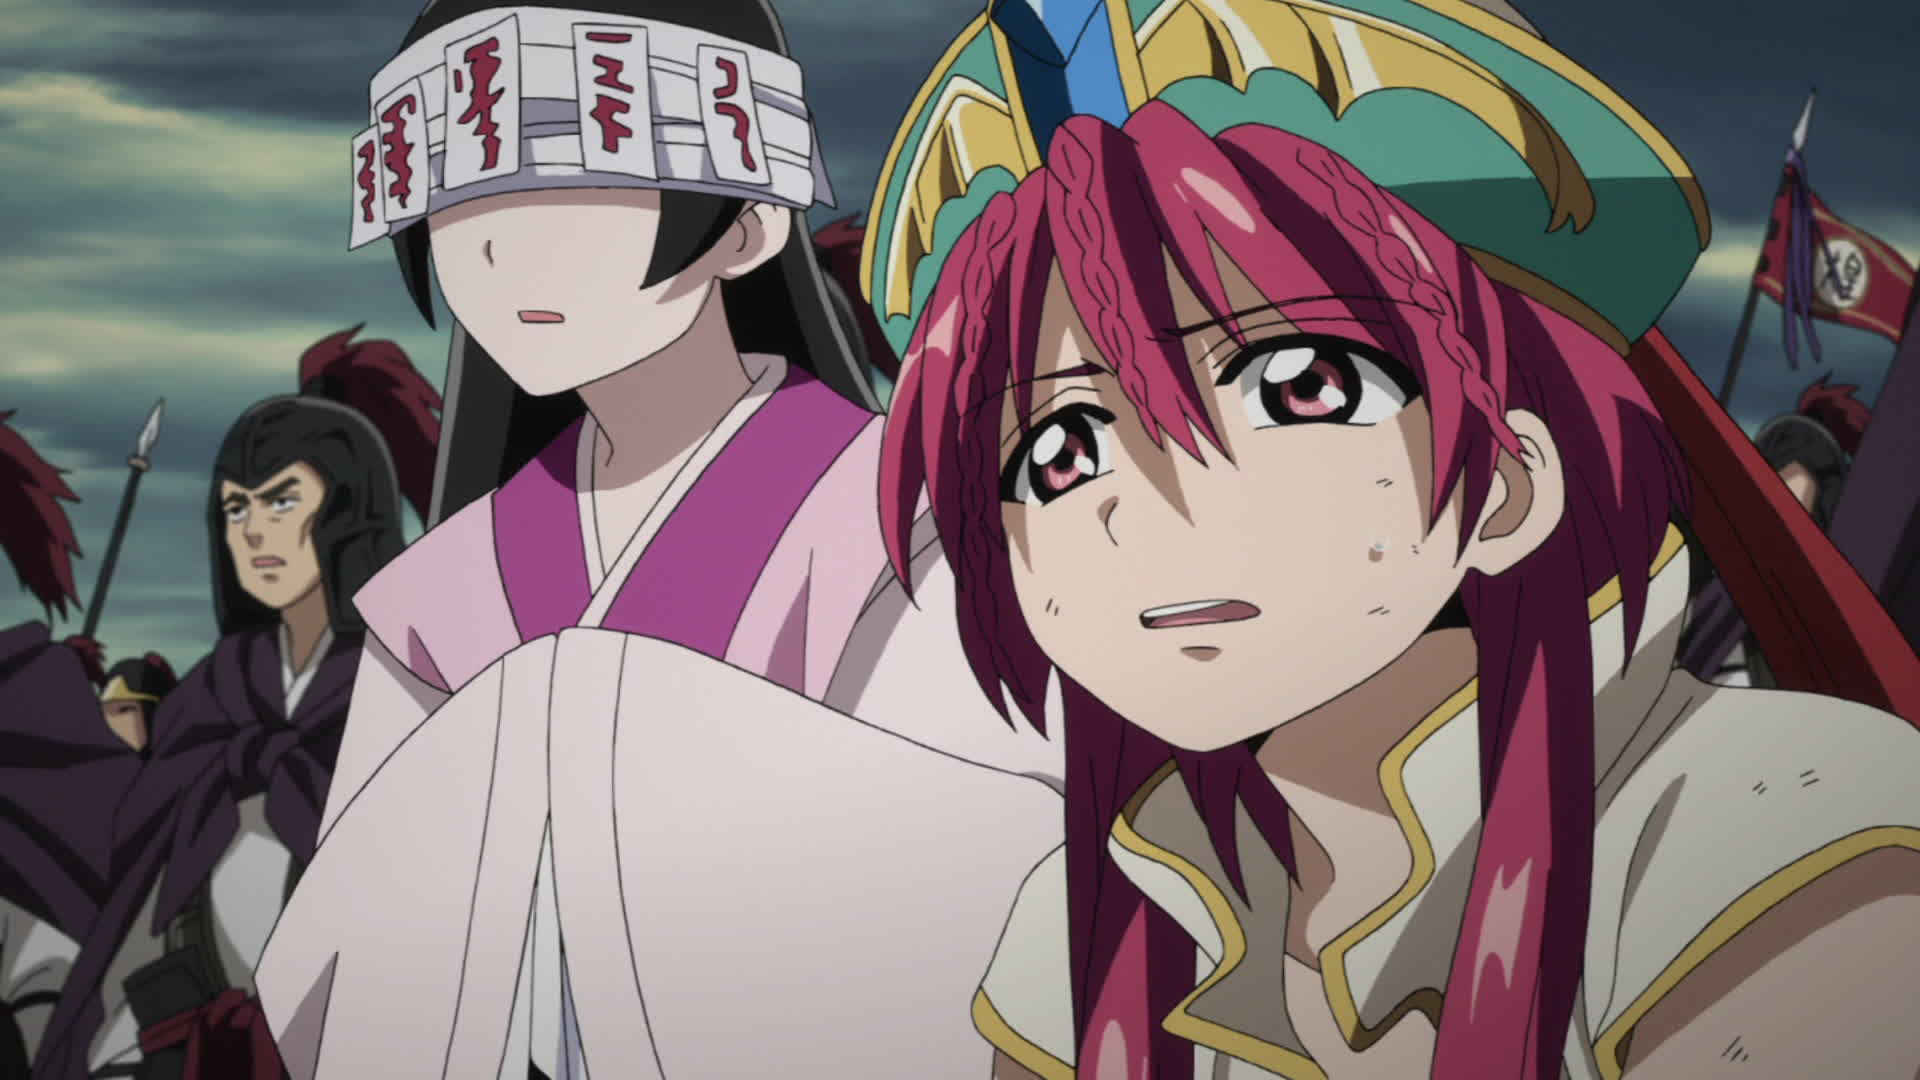 Magi - The Labyrinth of Magic Series 1 Part 2 - Fetch Publicity